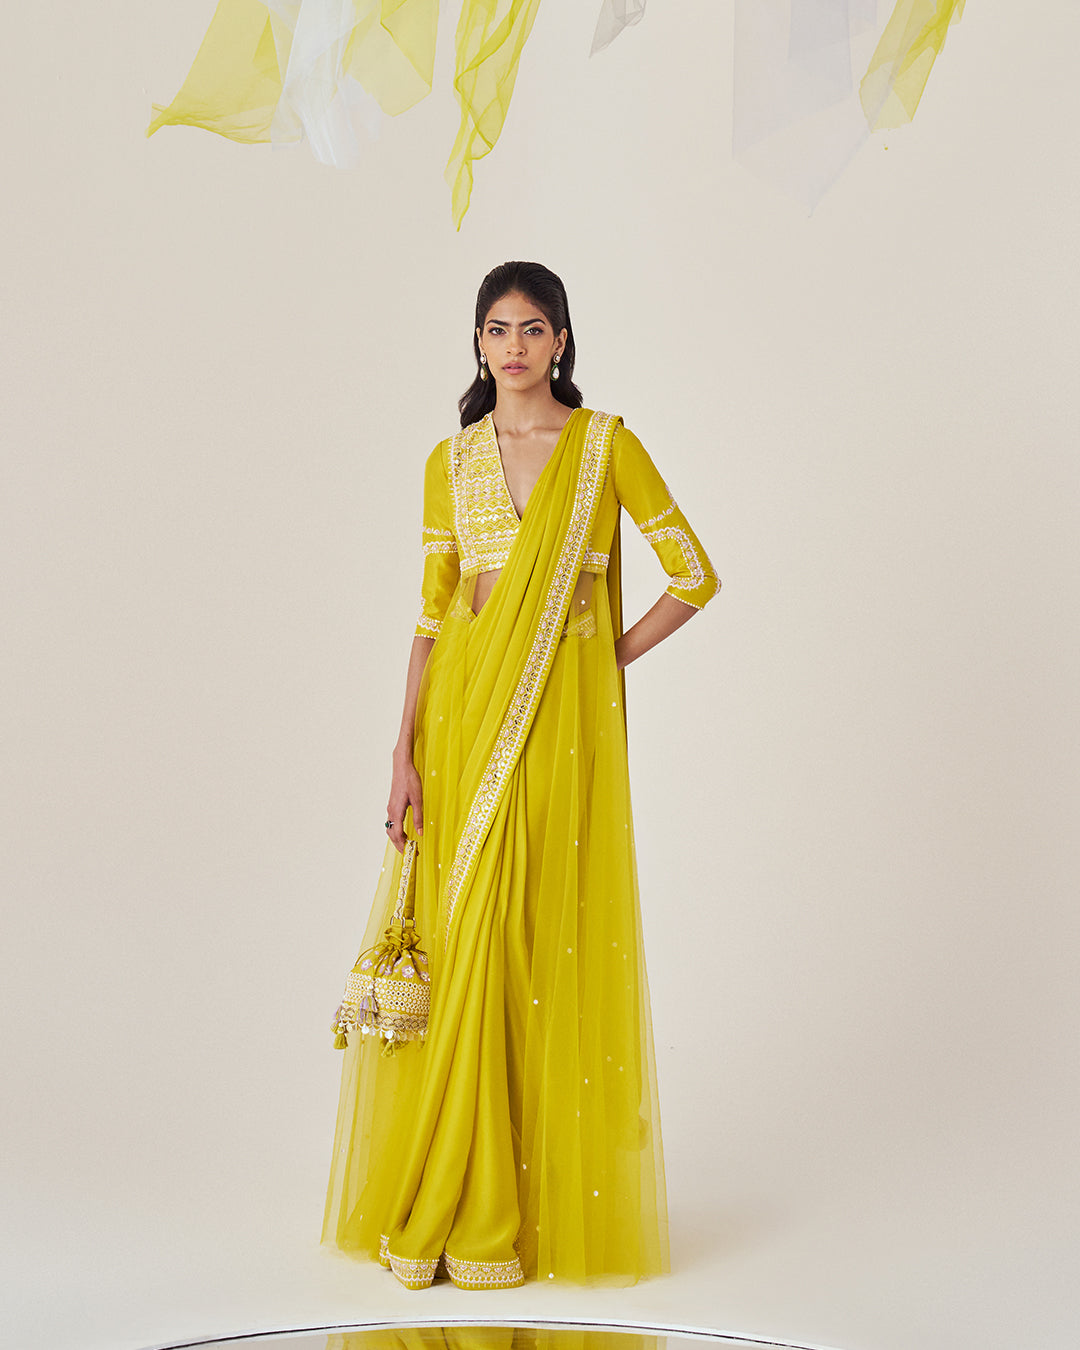 Silk Satin Georgette Saree: Embroidered Blouse with Net Veil